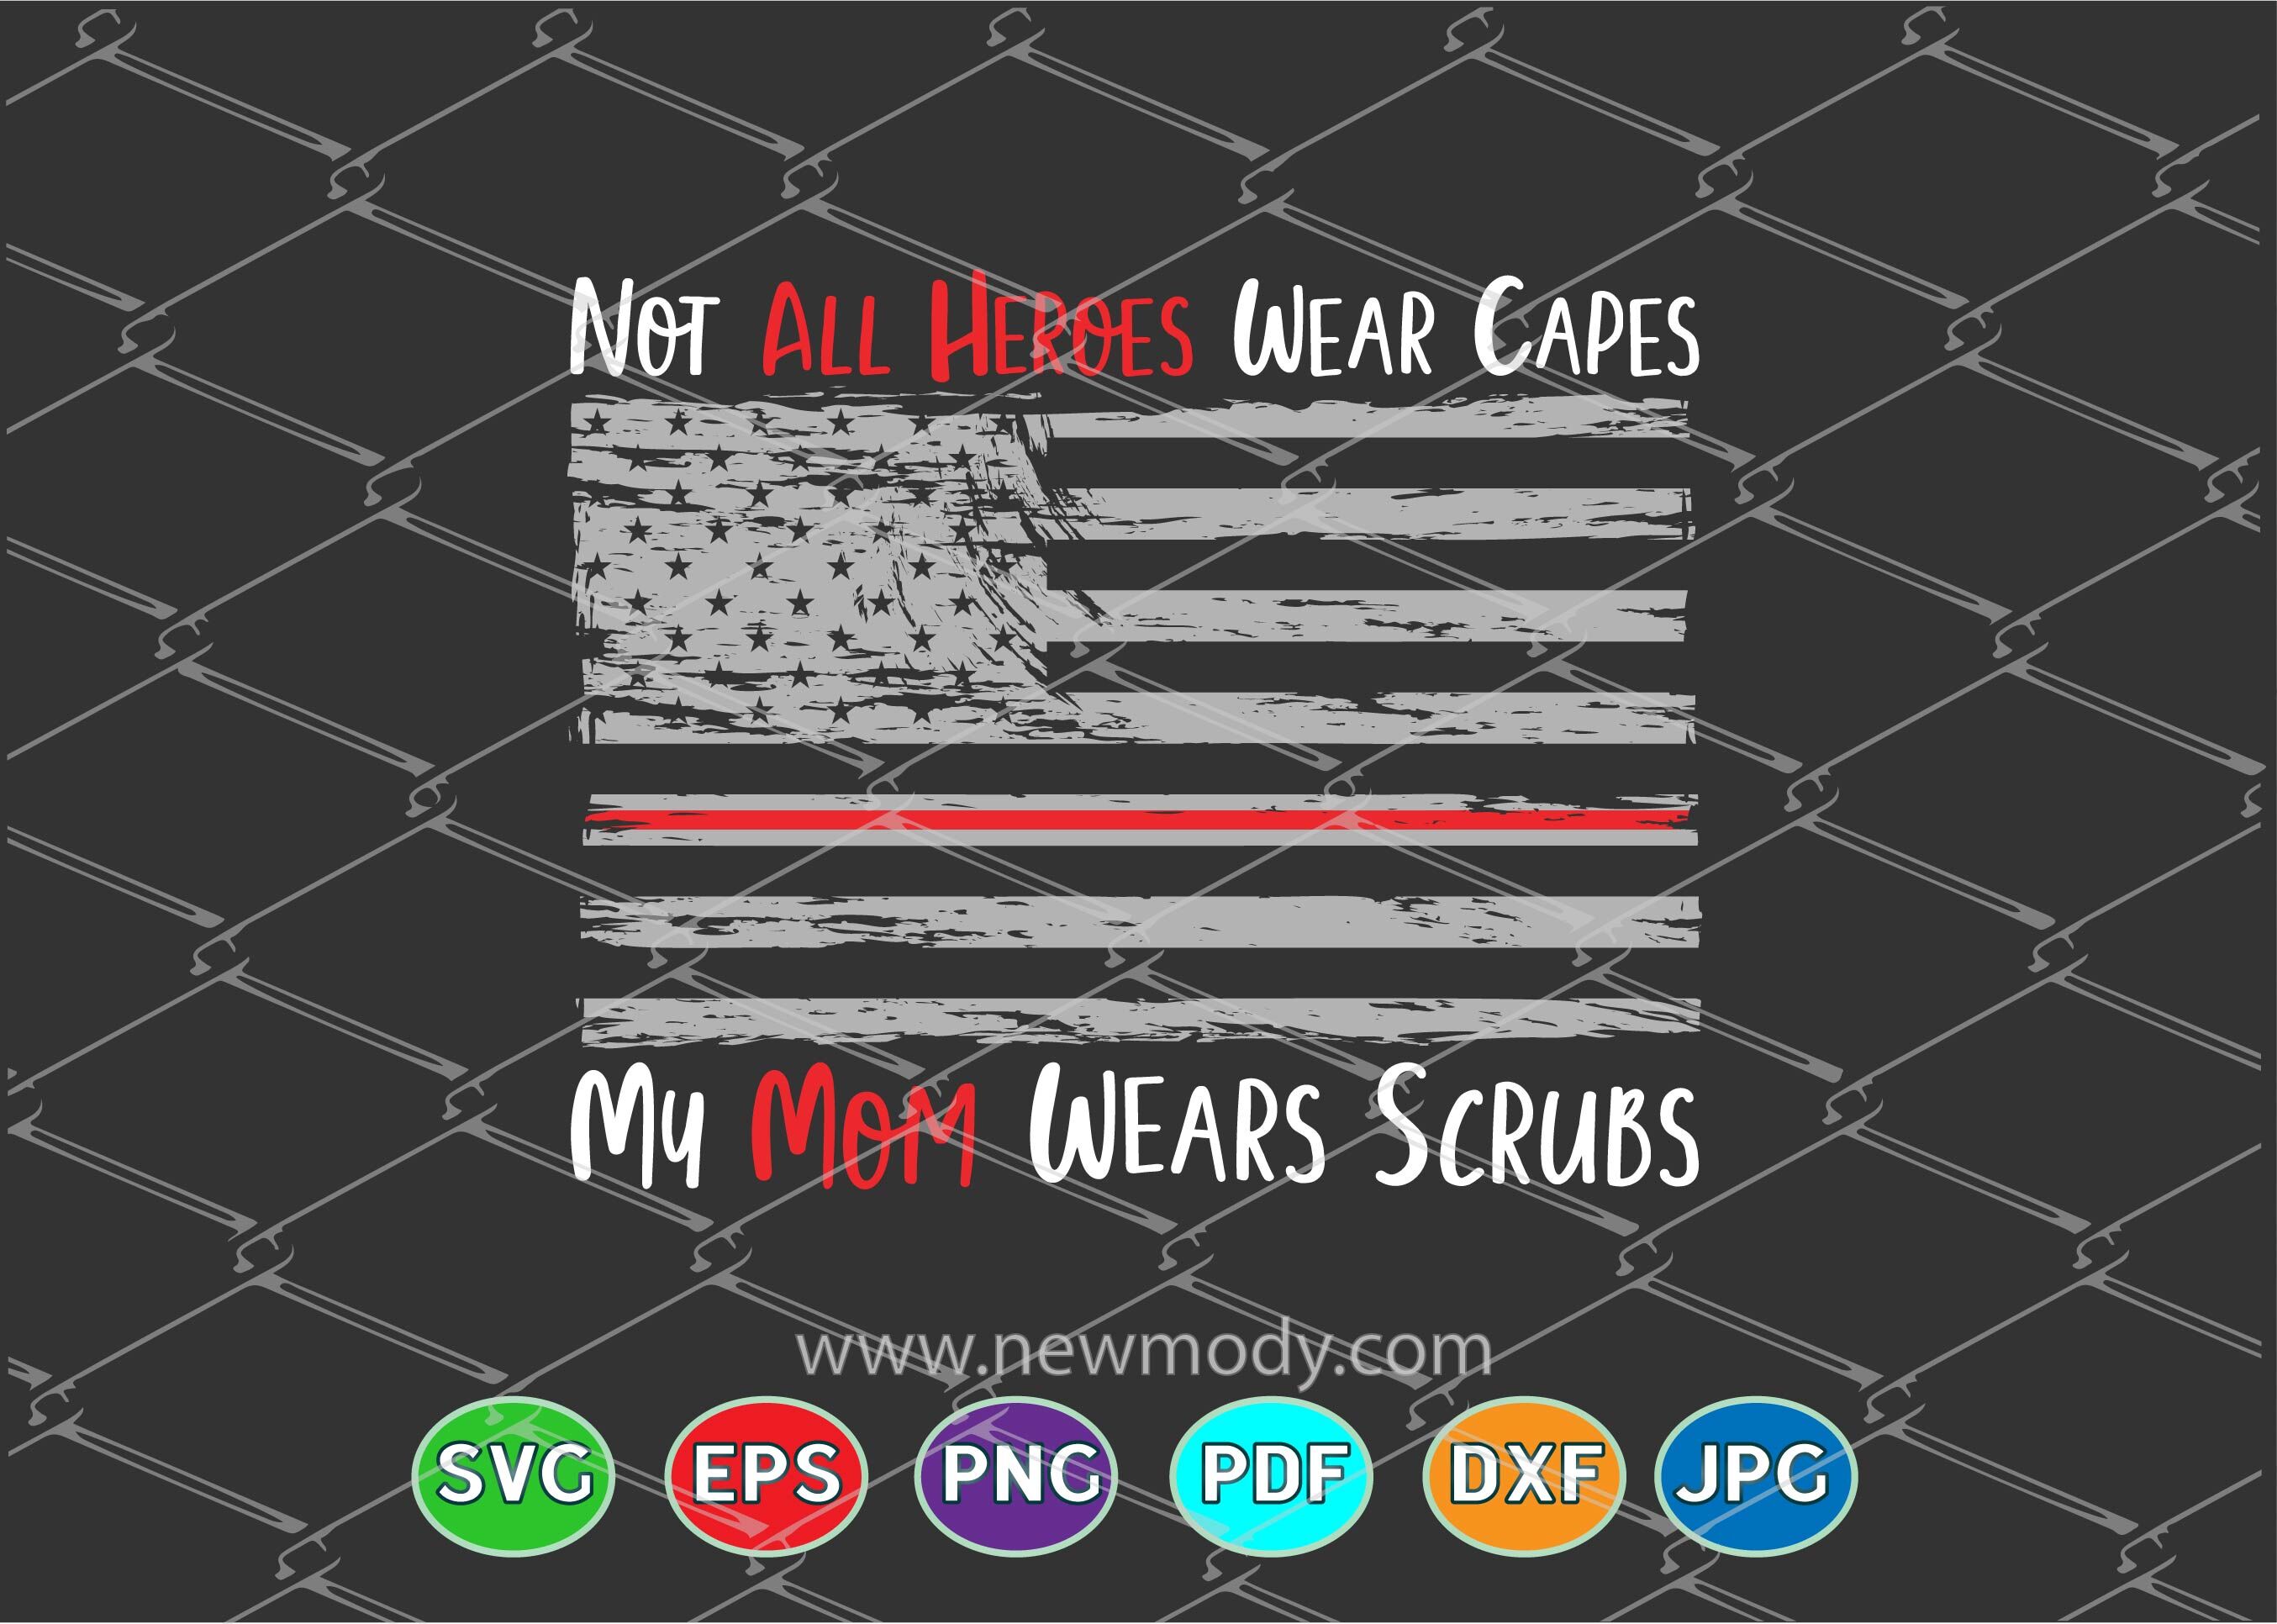 Download Not All Heroes Wear Capes SVG - My Mom Wears Scrubs SVG ...